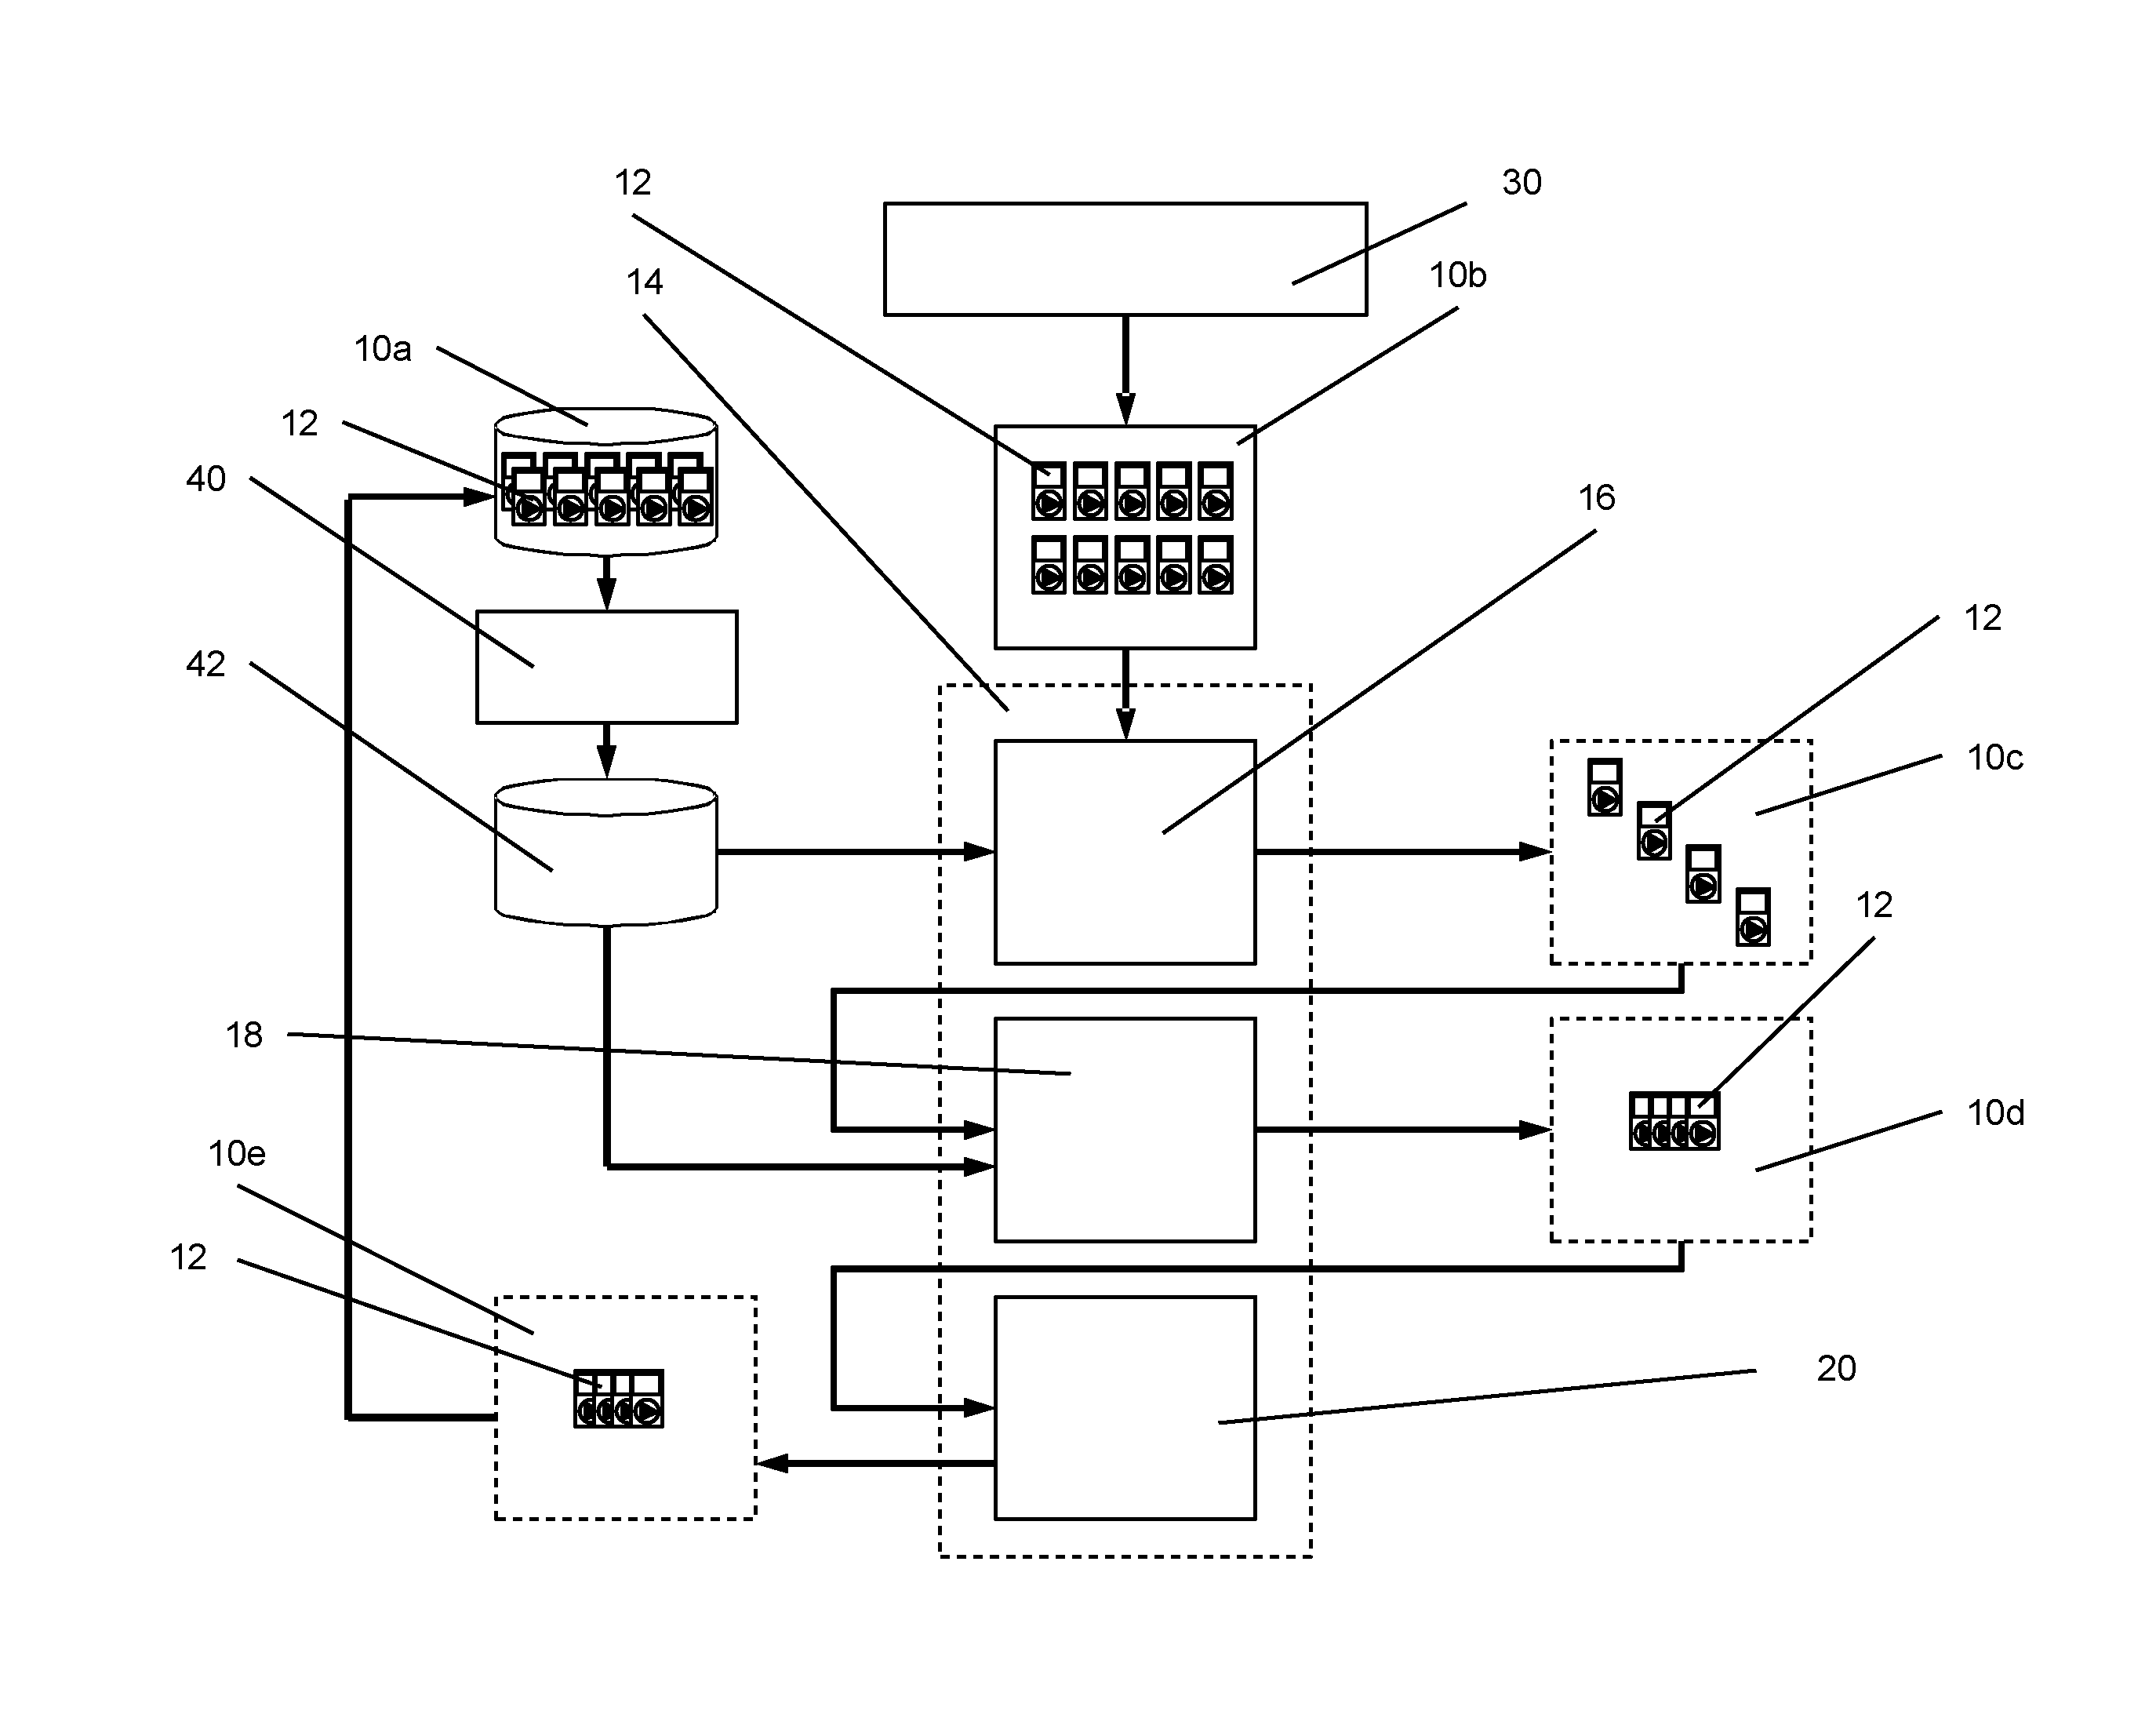 Method and system for efficiently compiling media content items for a media-on-demand platform